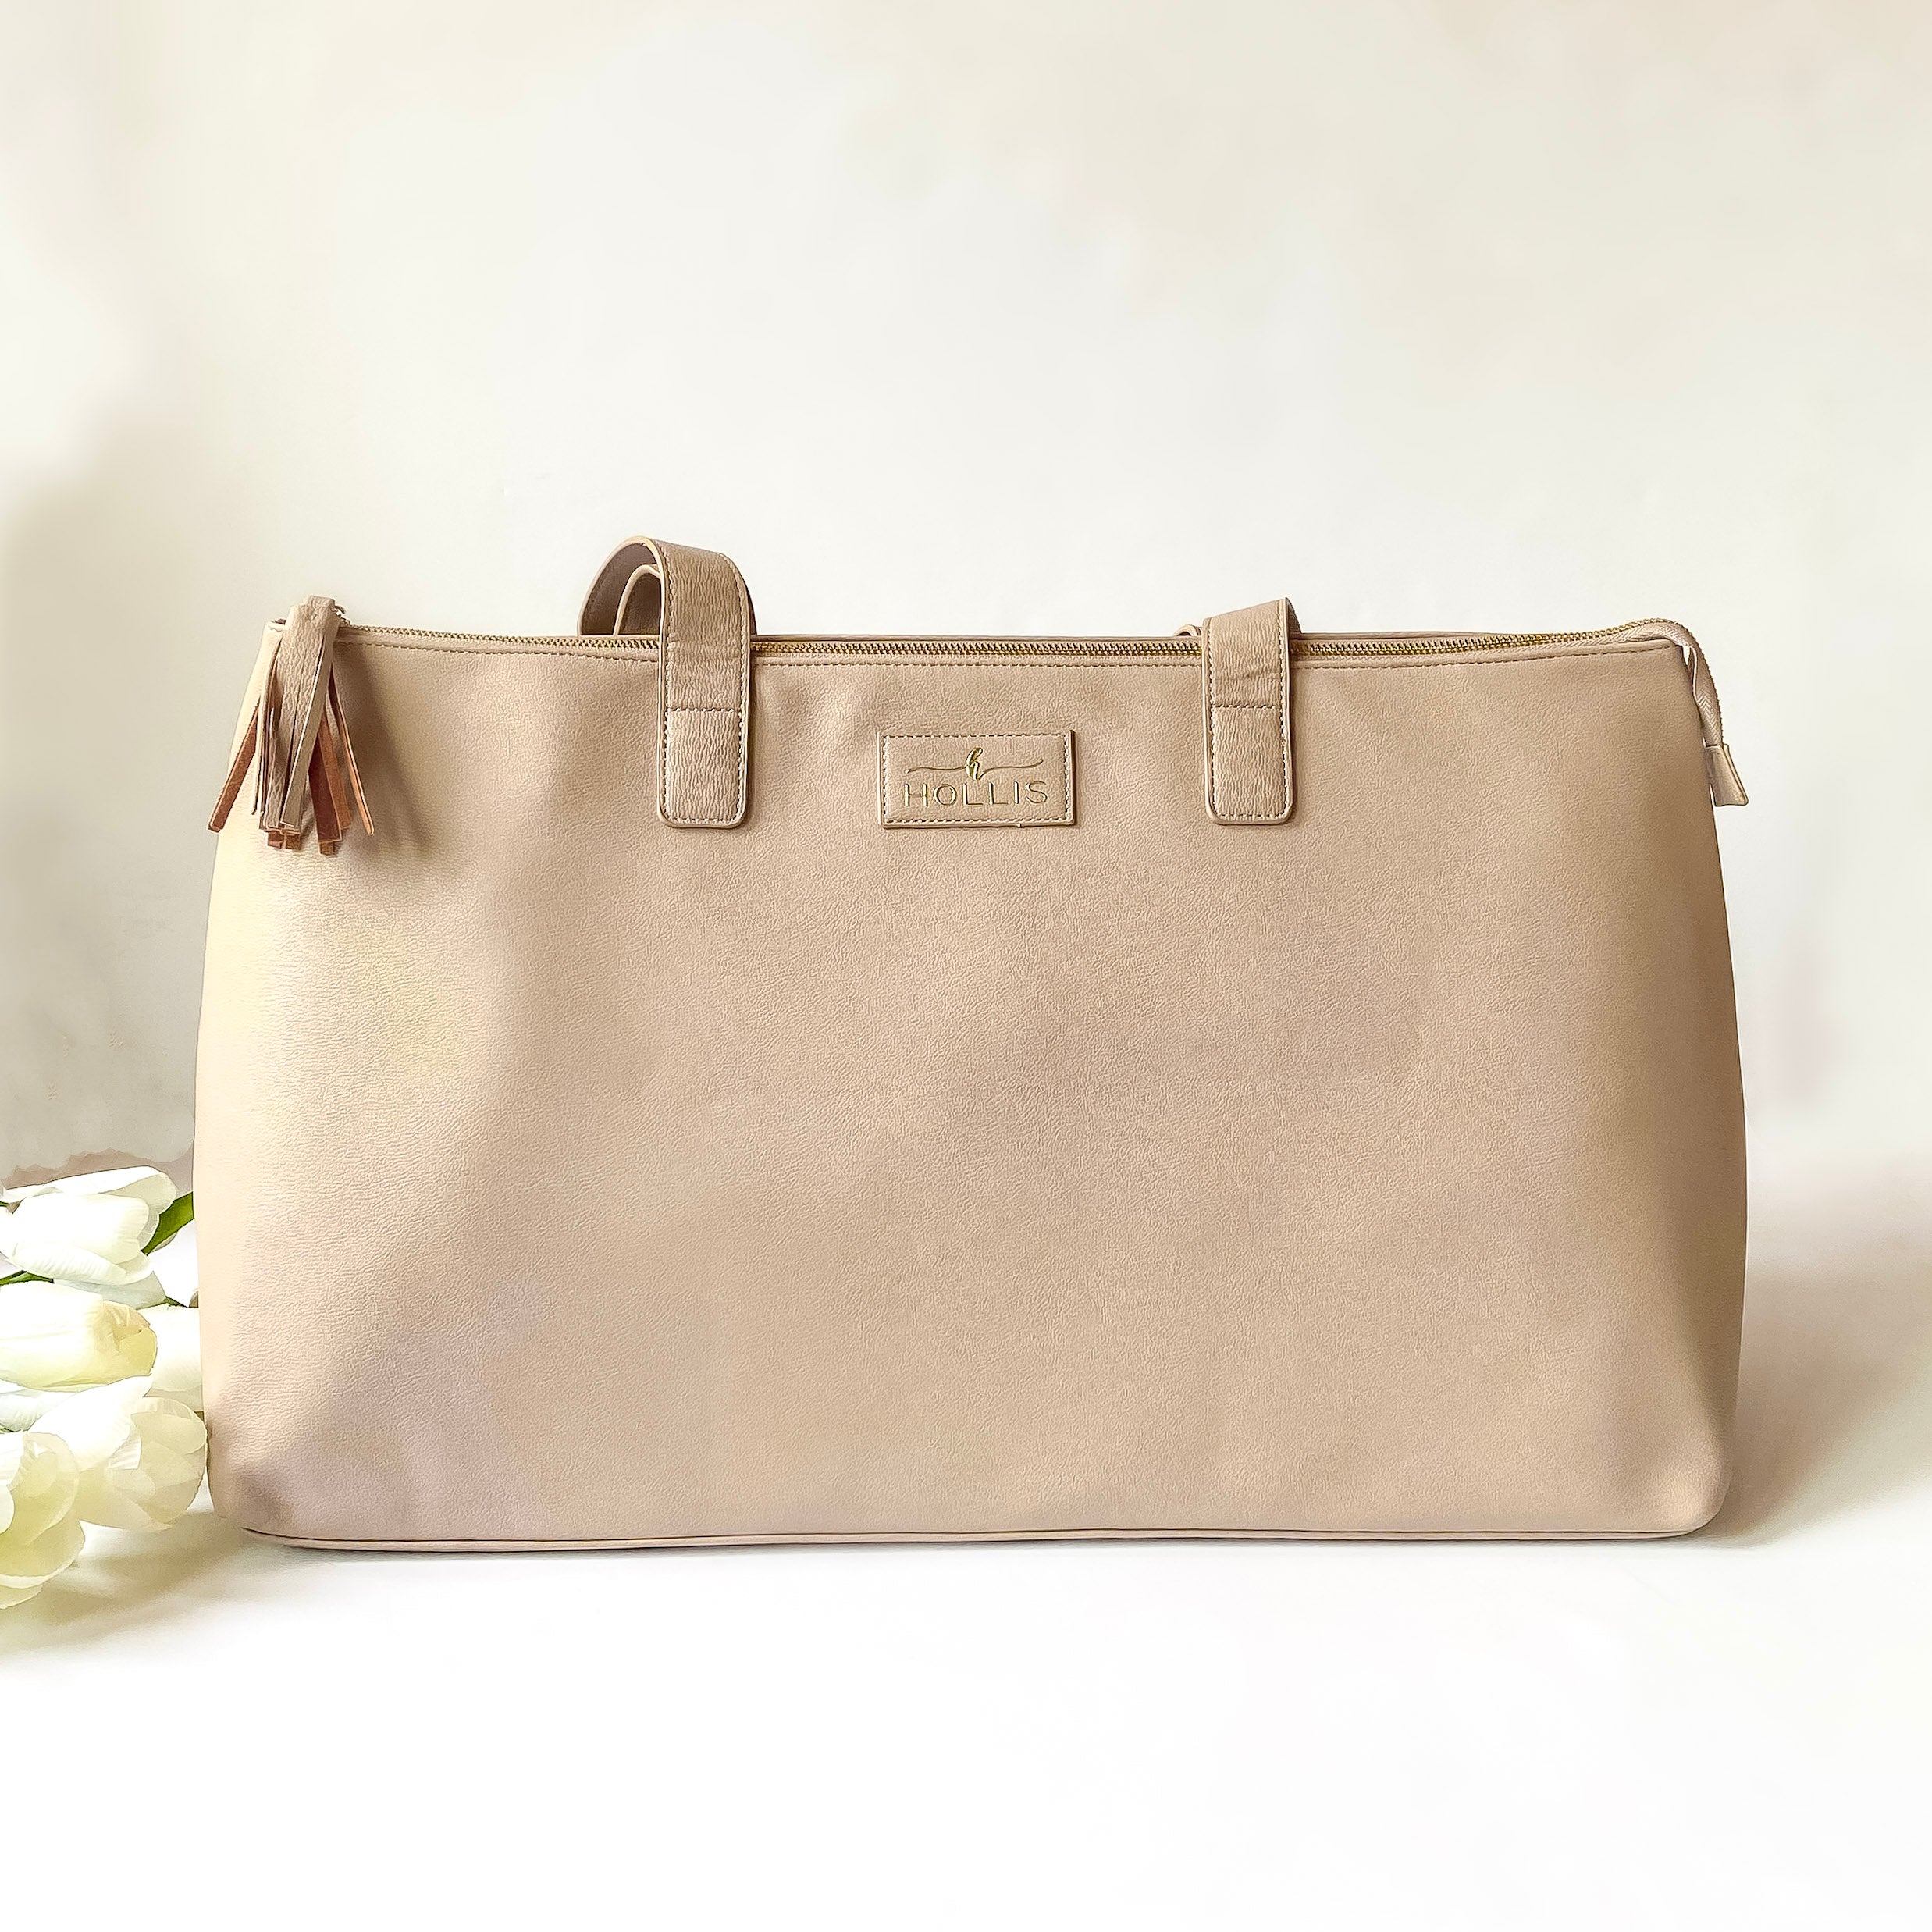 Nude duffle bag with a top zipper and nude handles. This bag is pictured on a white background with white flowers on the left side of the bag.